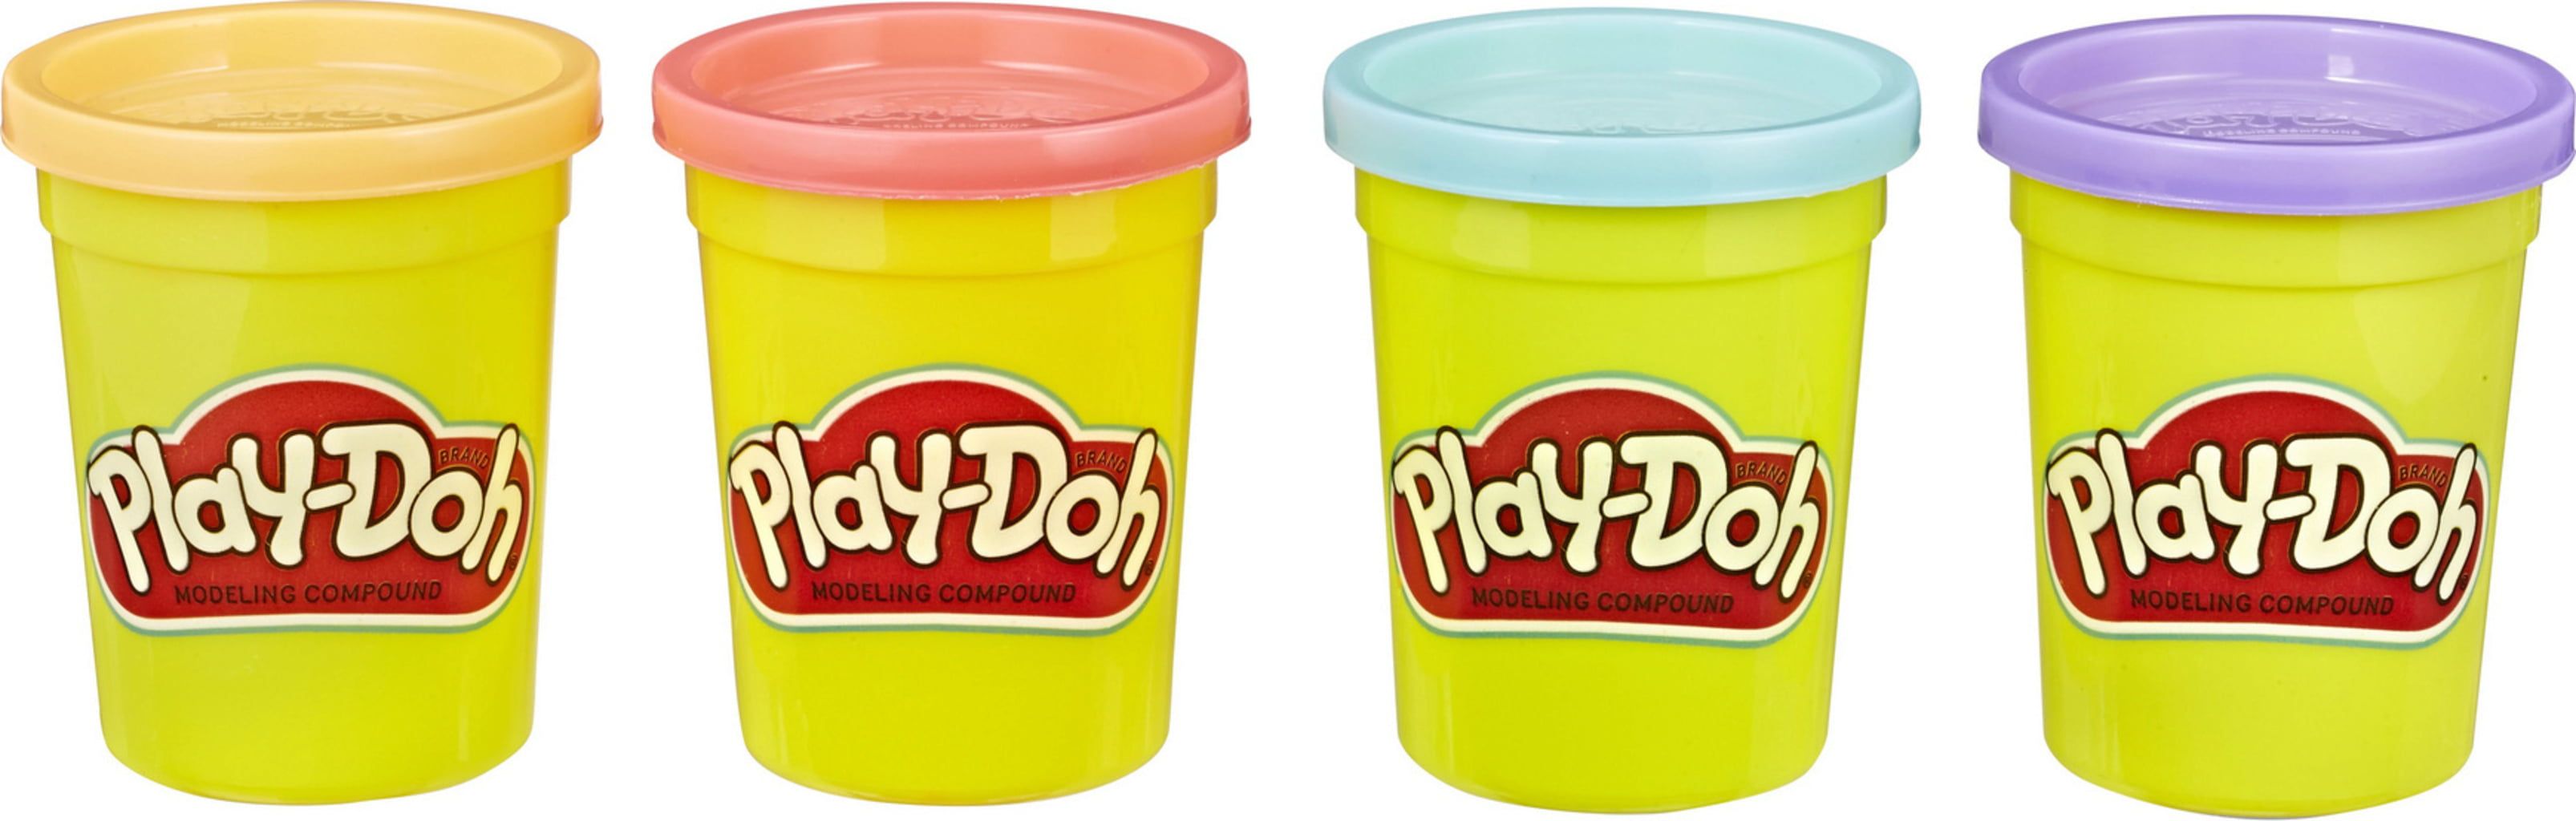 PLAY-DOH Play-Doh 4-pack SWEET (orange, pink, light blue and